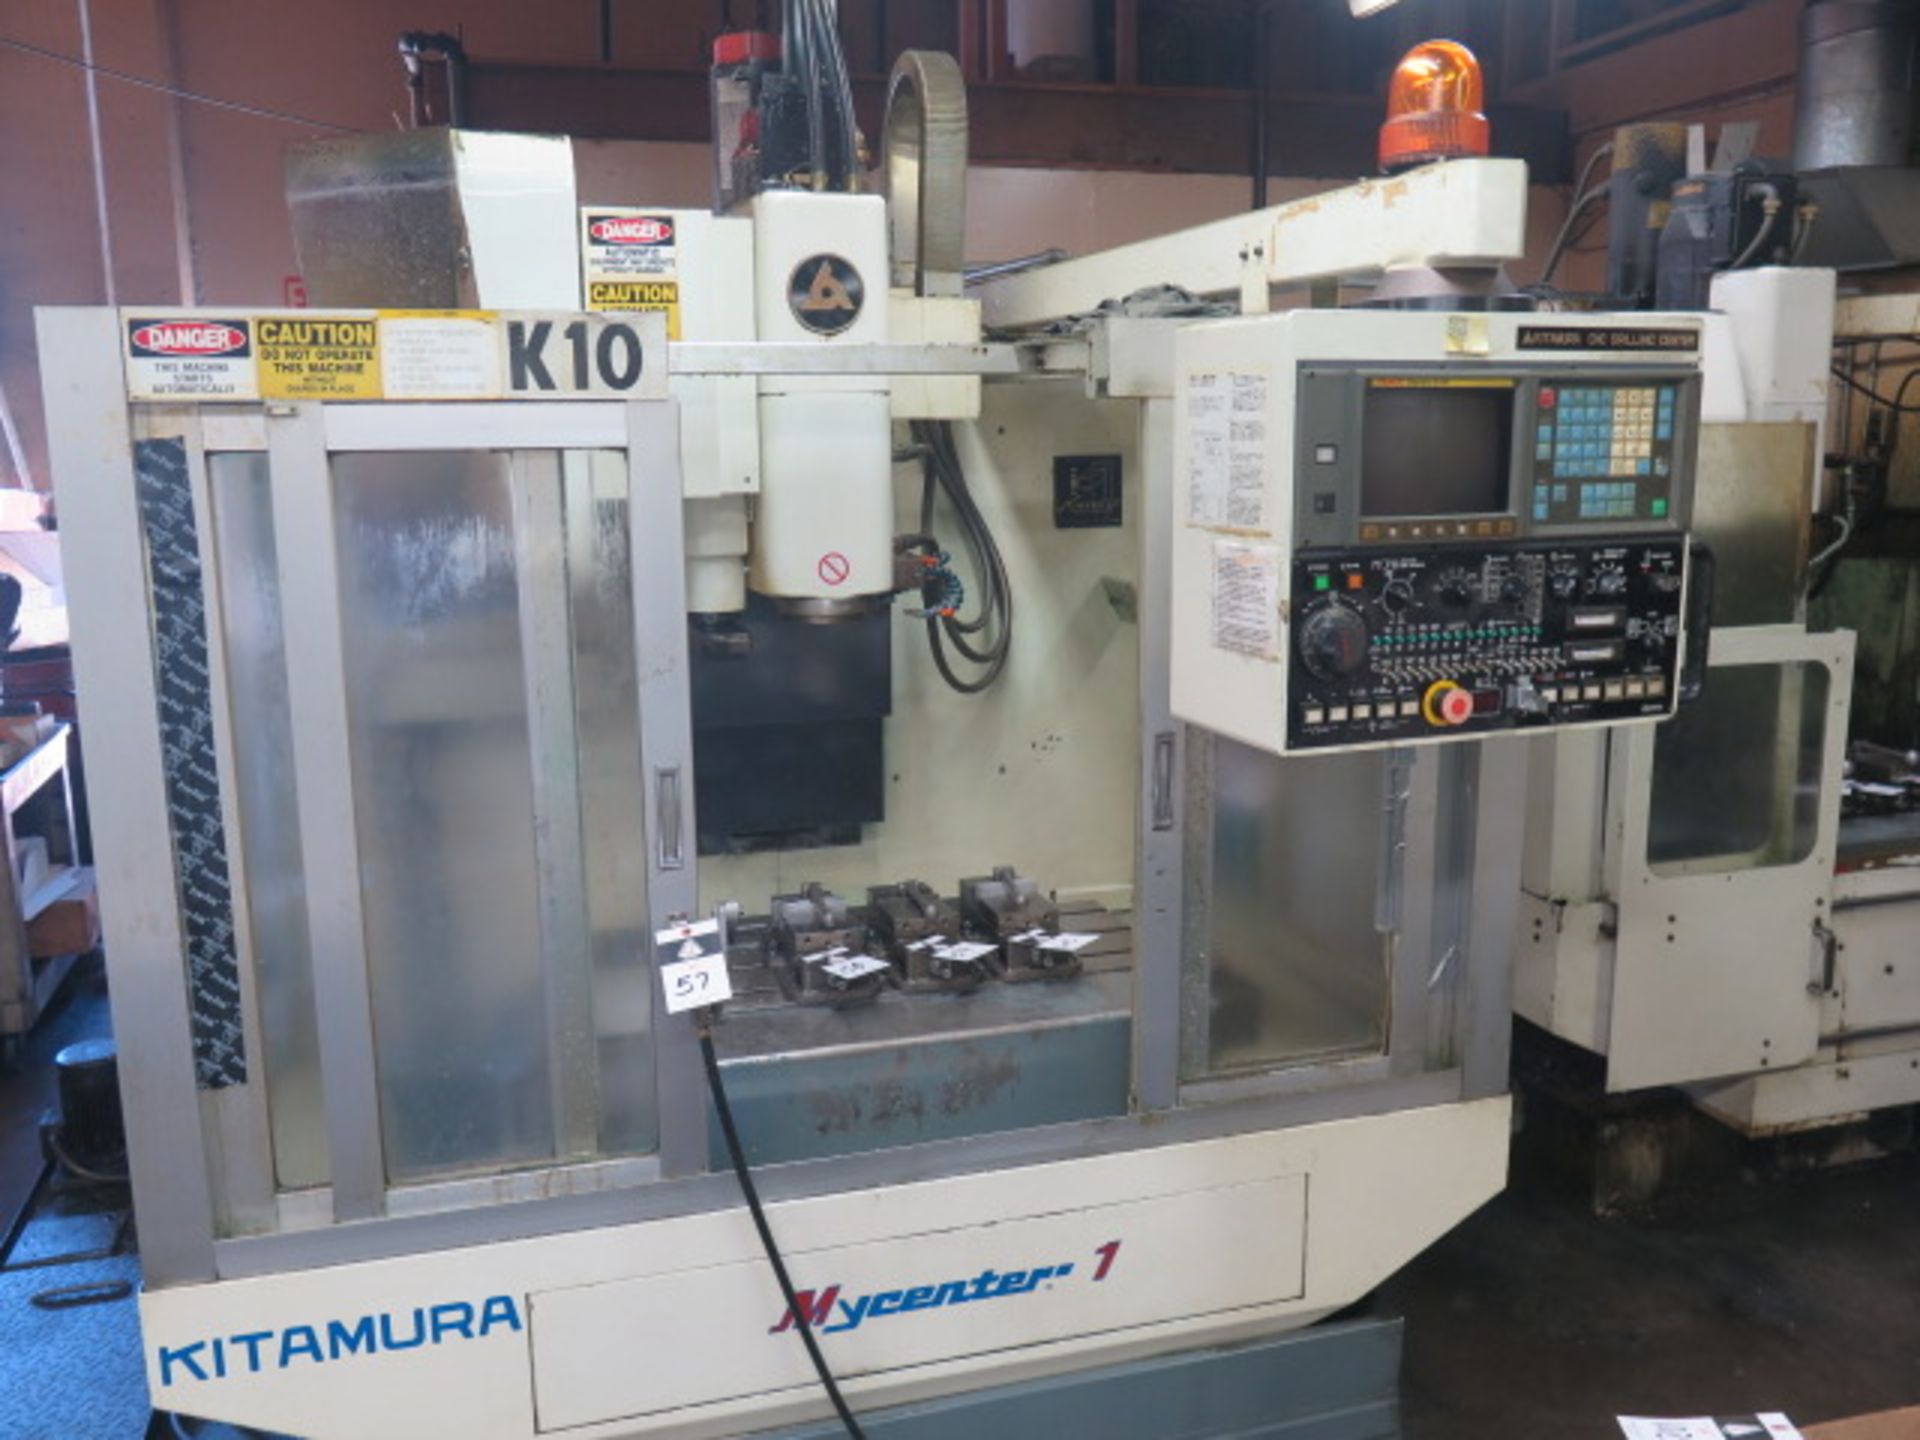 Kitamura Mycenter-1 CNC Vertical Machining Center s/n 02996 w/ Fanuc Series 0-M Controls, SOLD AS IS